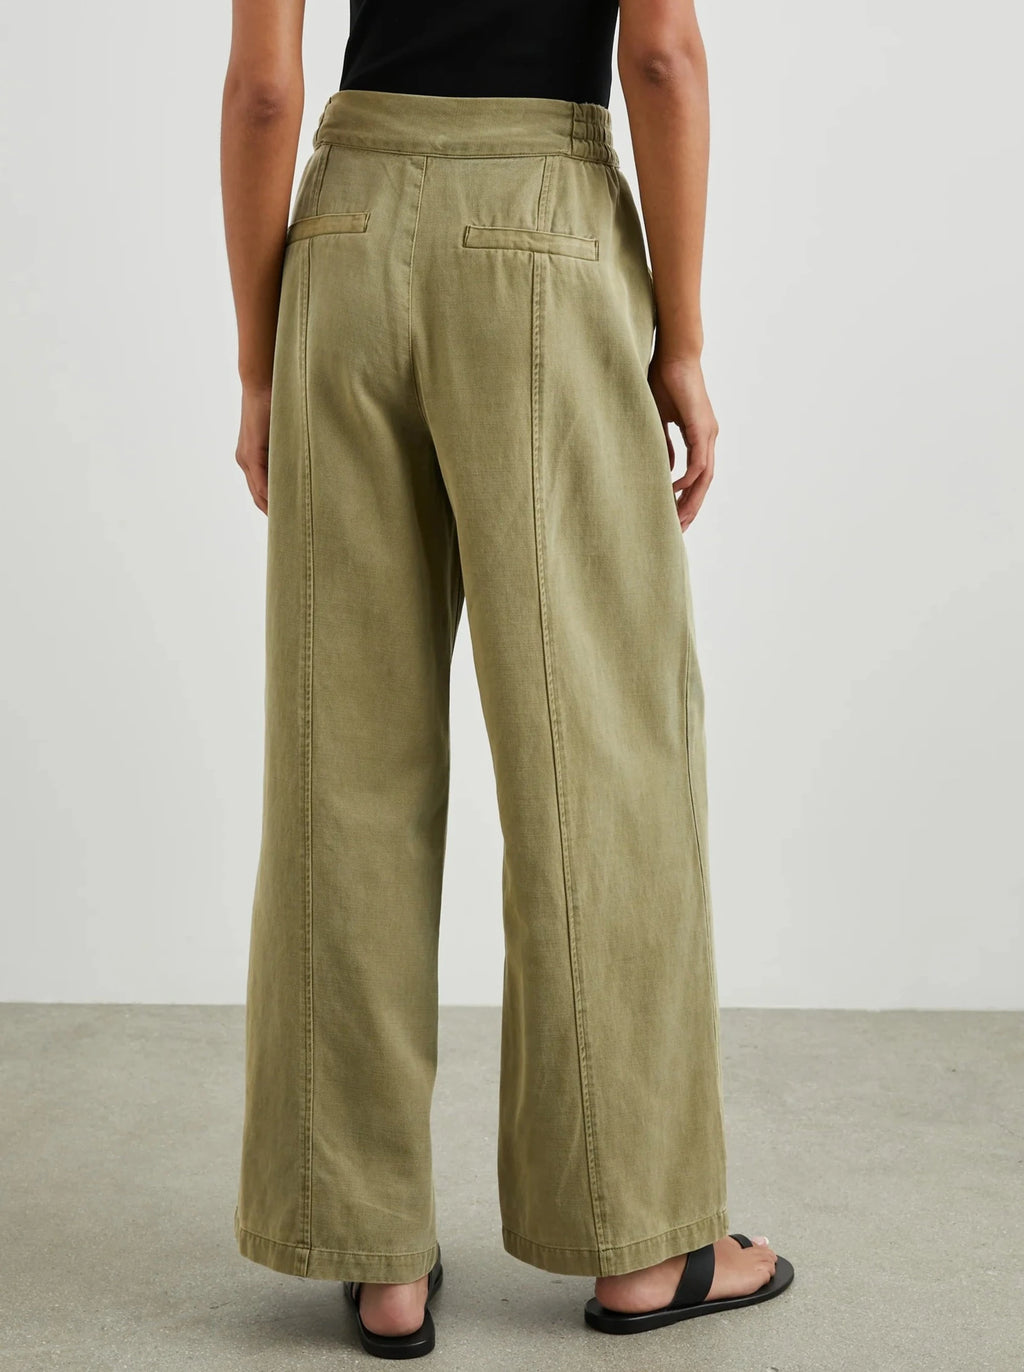 Greer Pant in Canteen